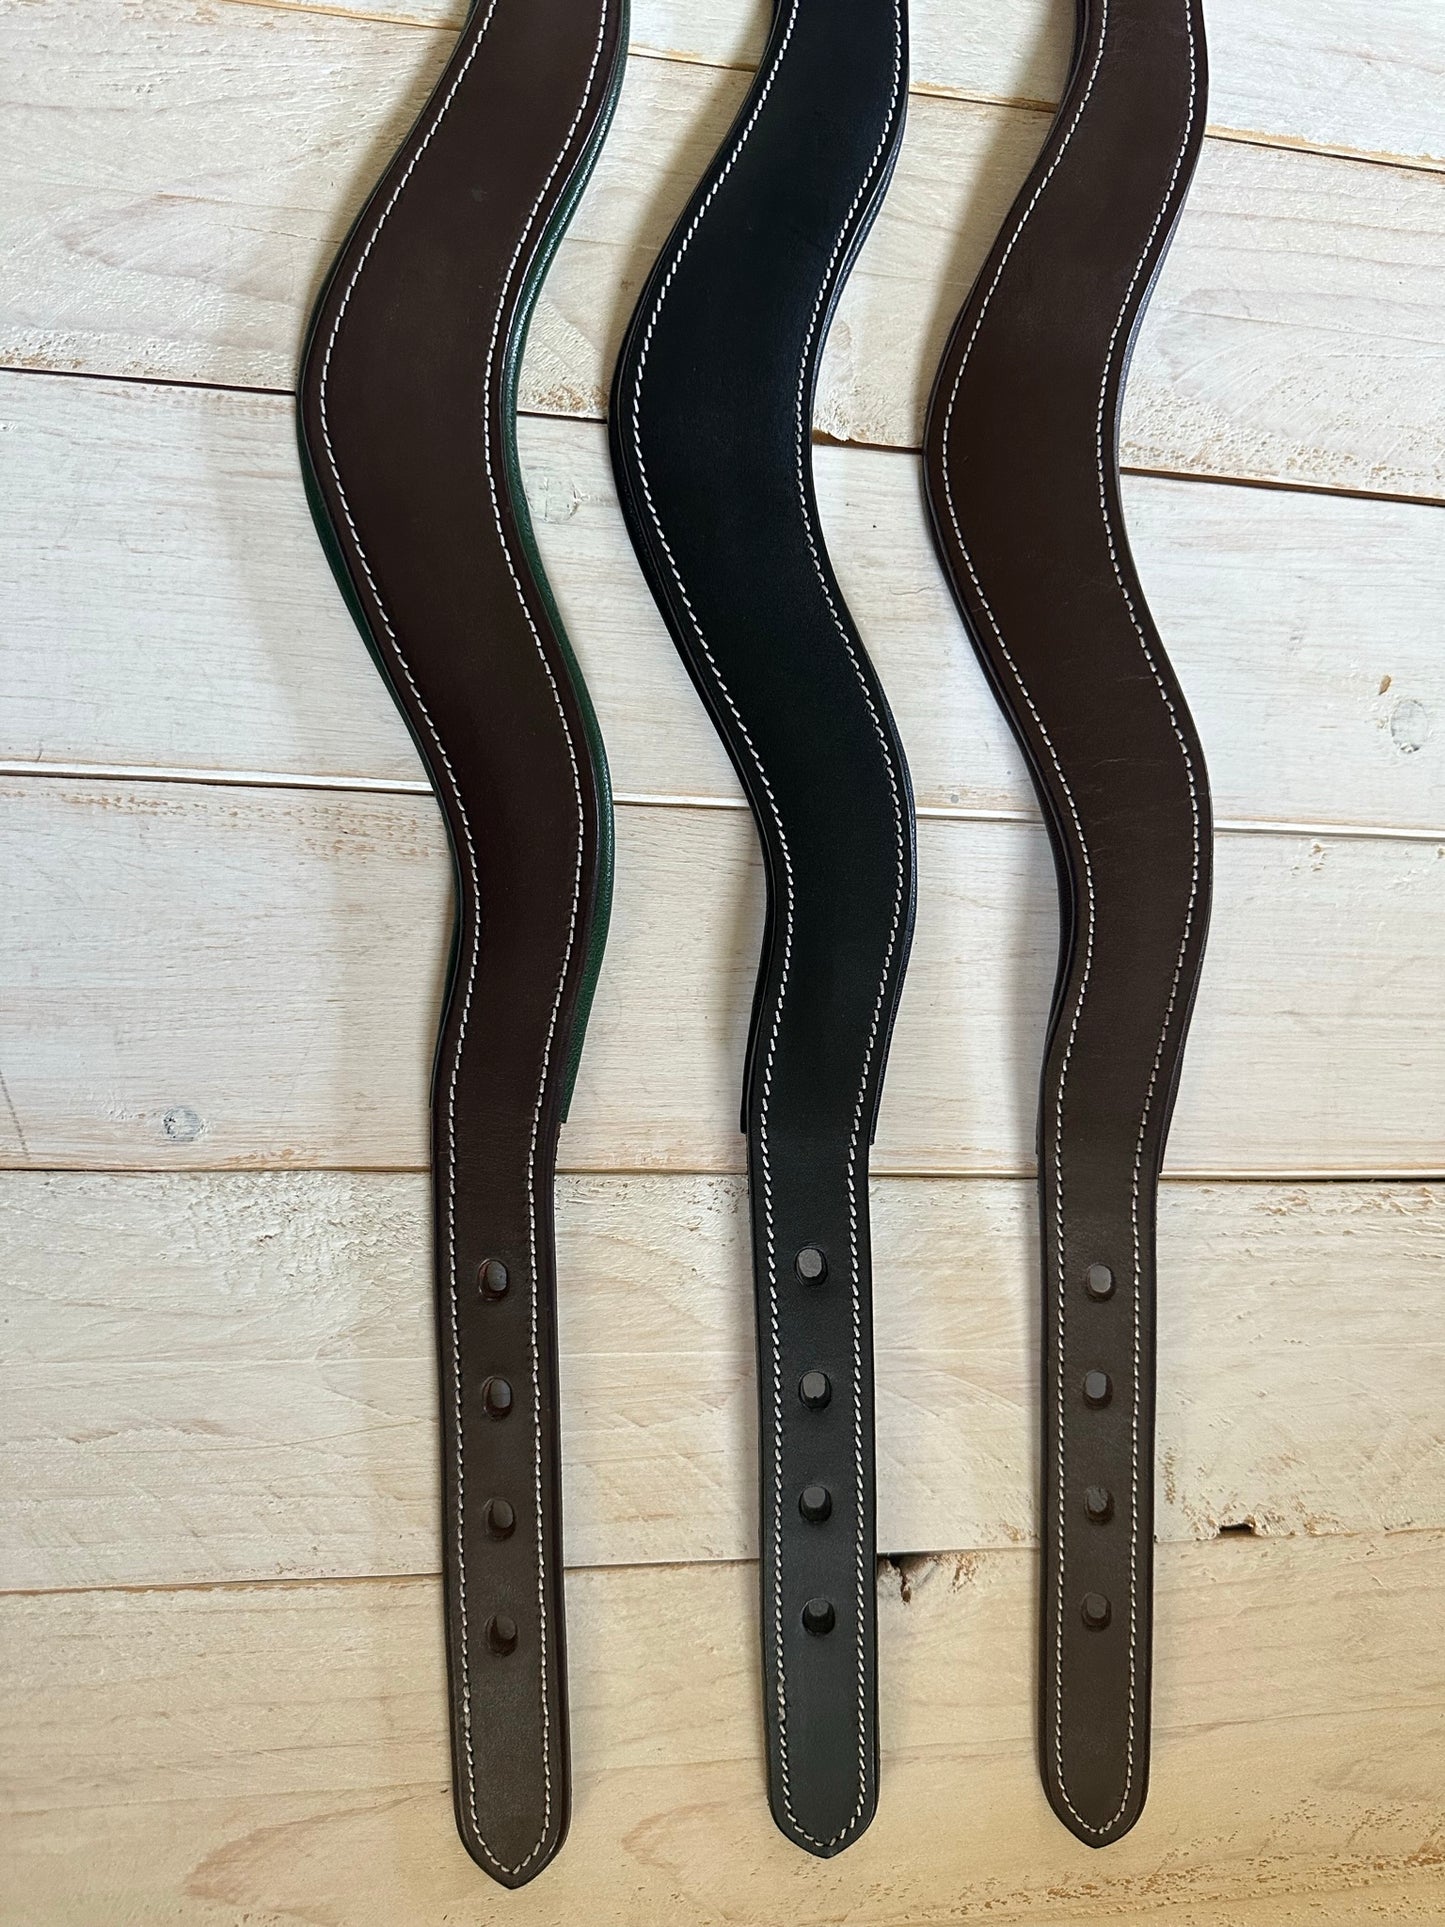 The Belmont Replacement Halter Crown